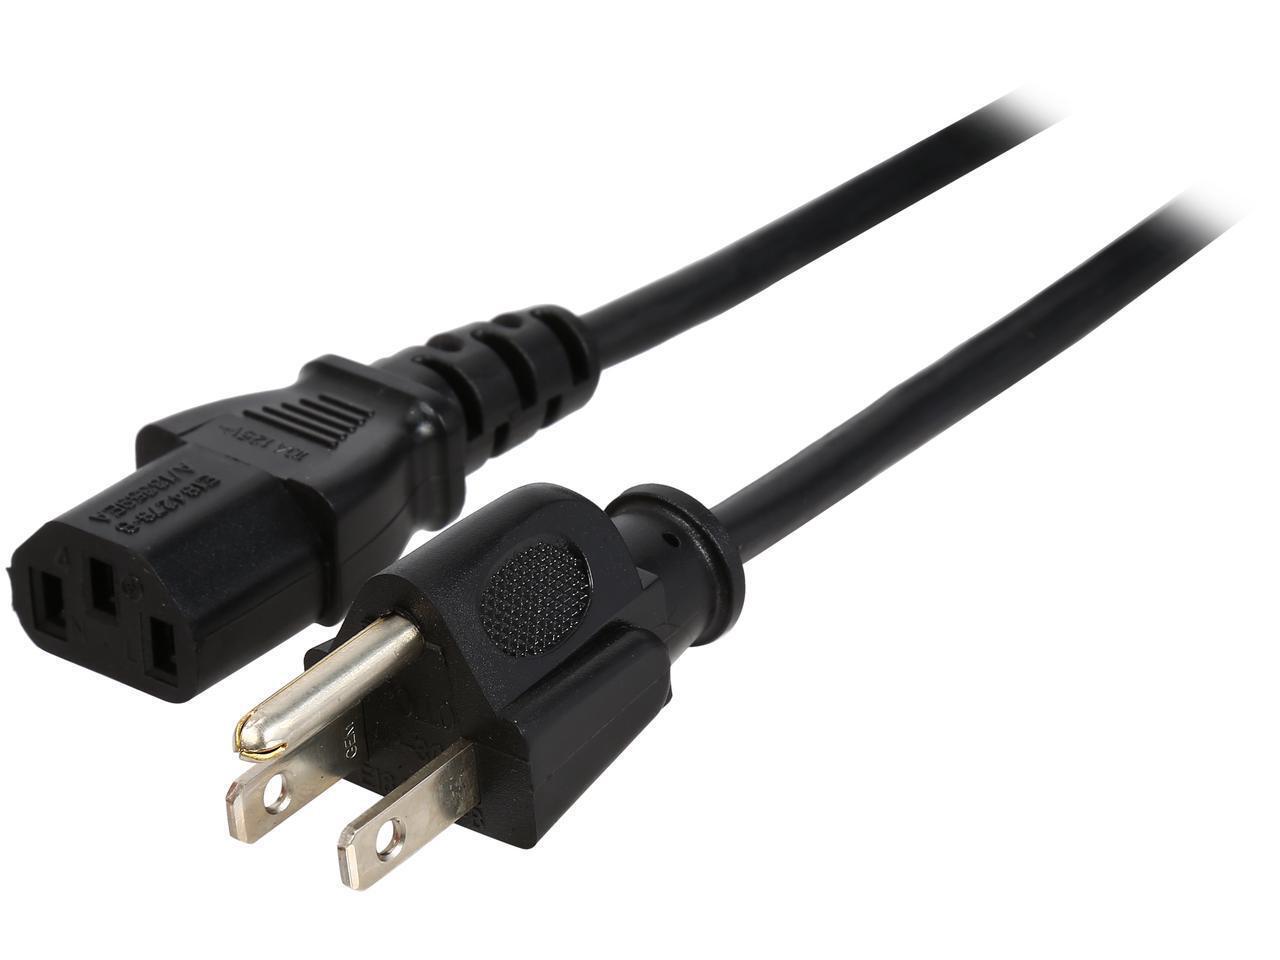 *NEW Rosewill 5-Foot 18 AWG Power Cord / Cable with 3-Conductor PC Socket Black 